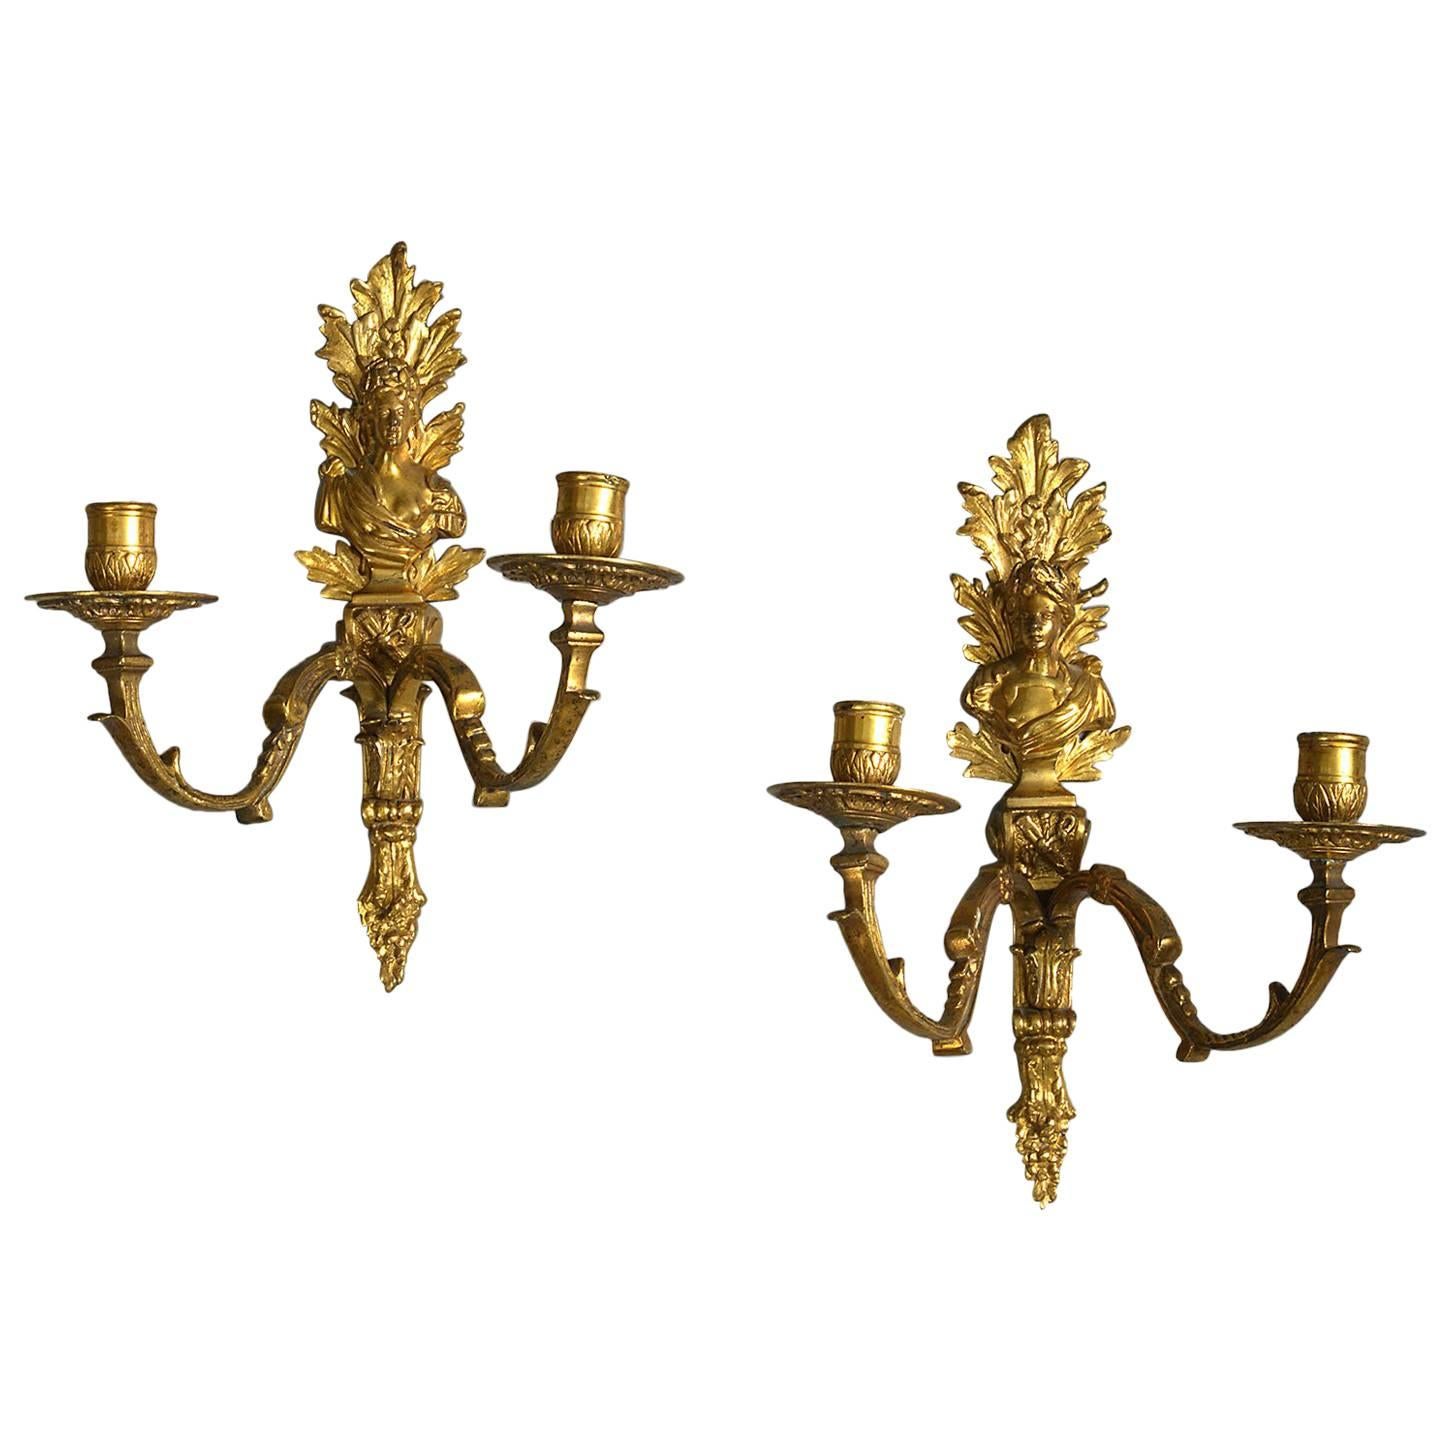 Pair of Early 18th Century French Louis XIV Gilt-Brass Wall-Lights or Sconces For Sale